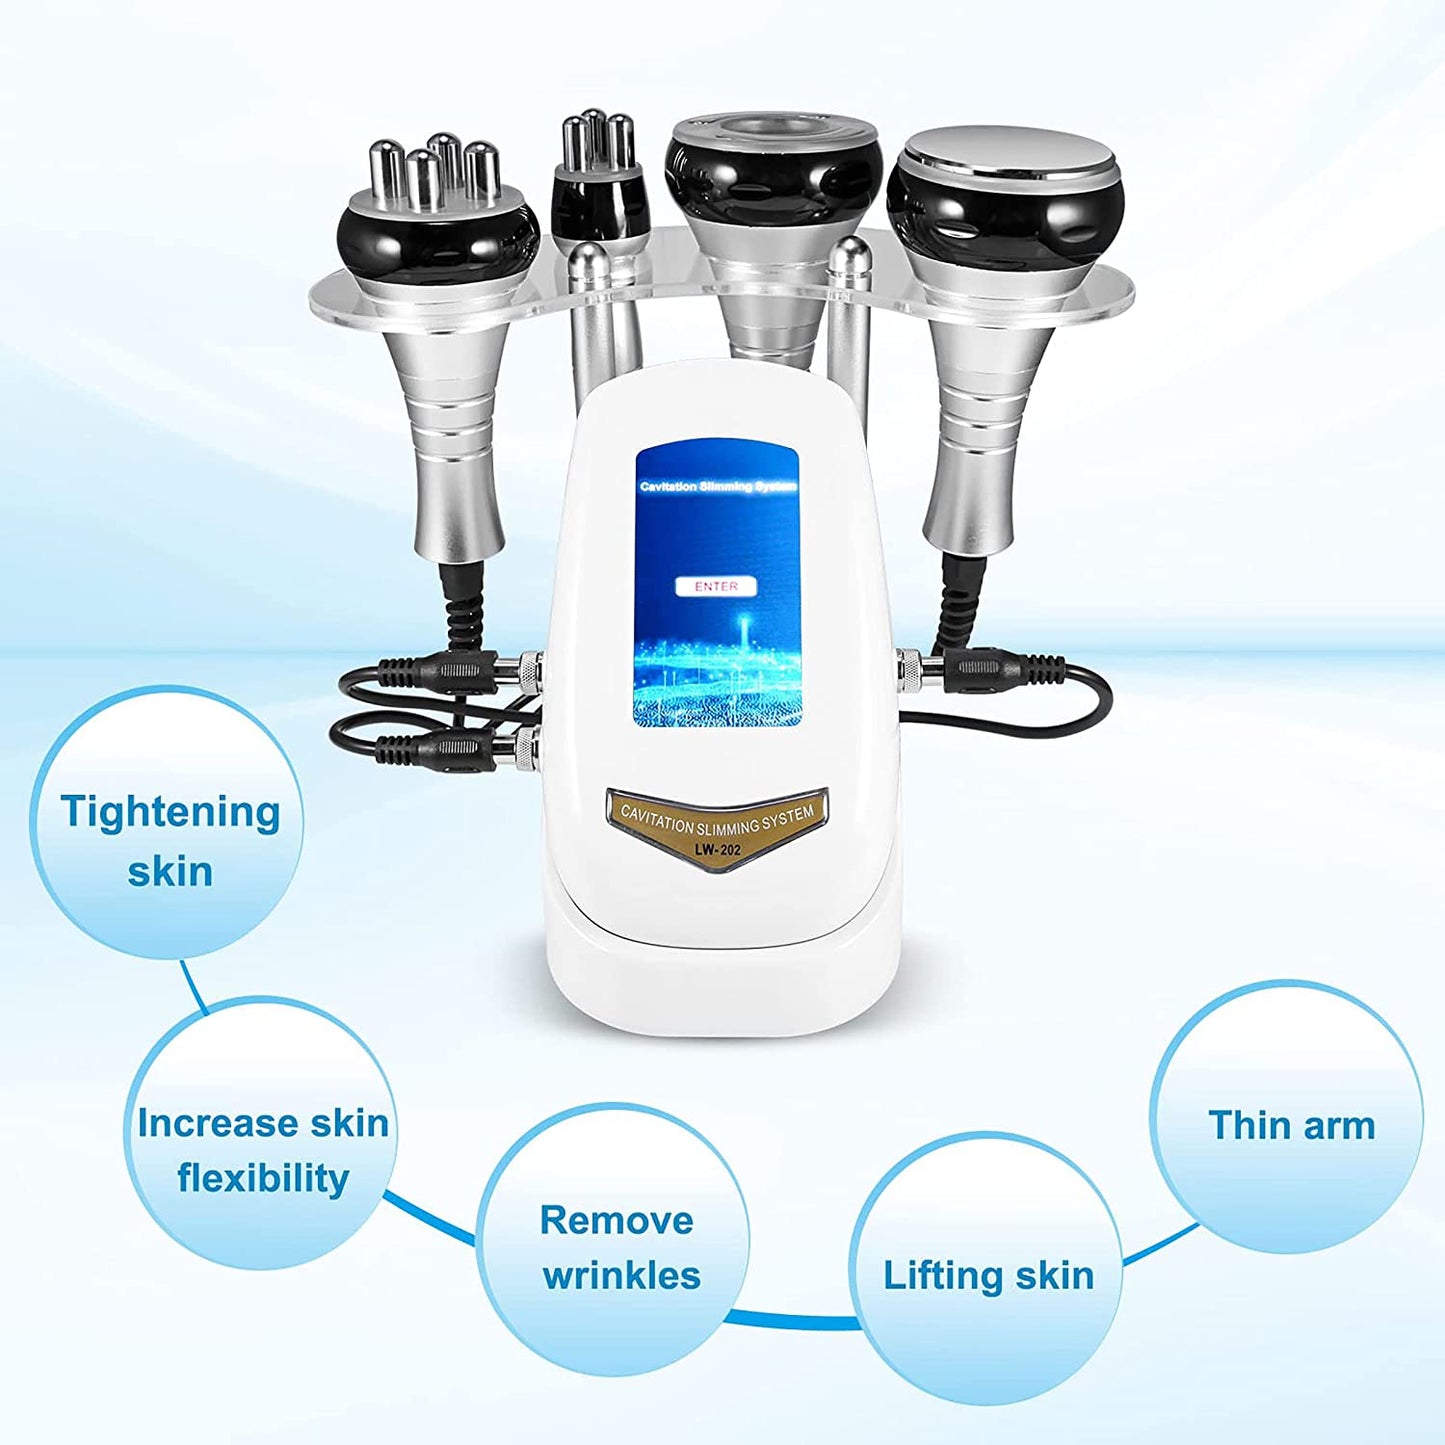 4in1 40K Radio-frequency Vacuum Ultrasonic Cavitation Machine, Fat Burning Body Slimming Sculpting Device for Face, Arm, Waist, Belly, Leg